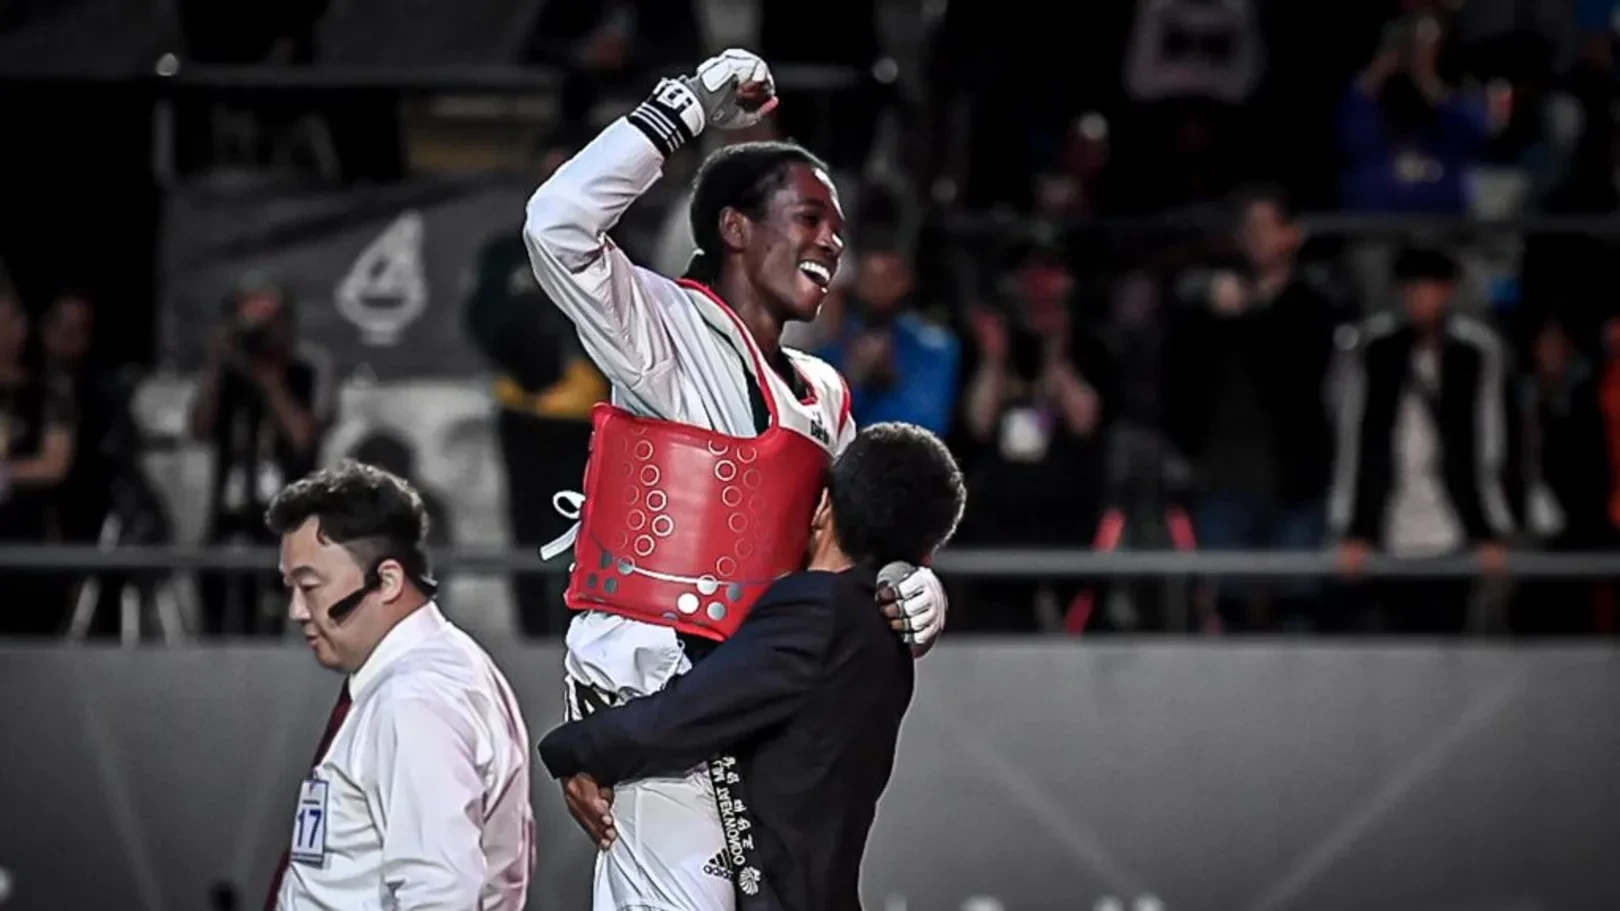 Omar Salim (red) with his father Gergely Salim after winning the 2022 Taekwondo World Championships. WT